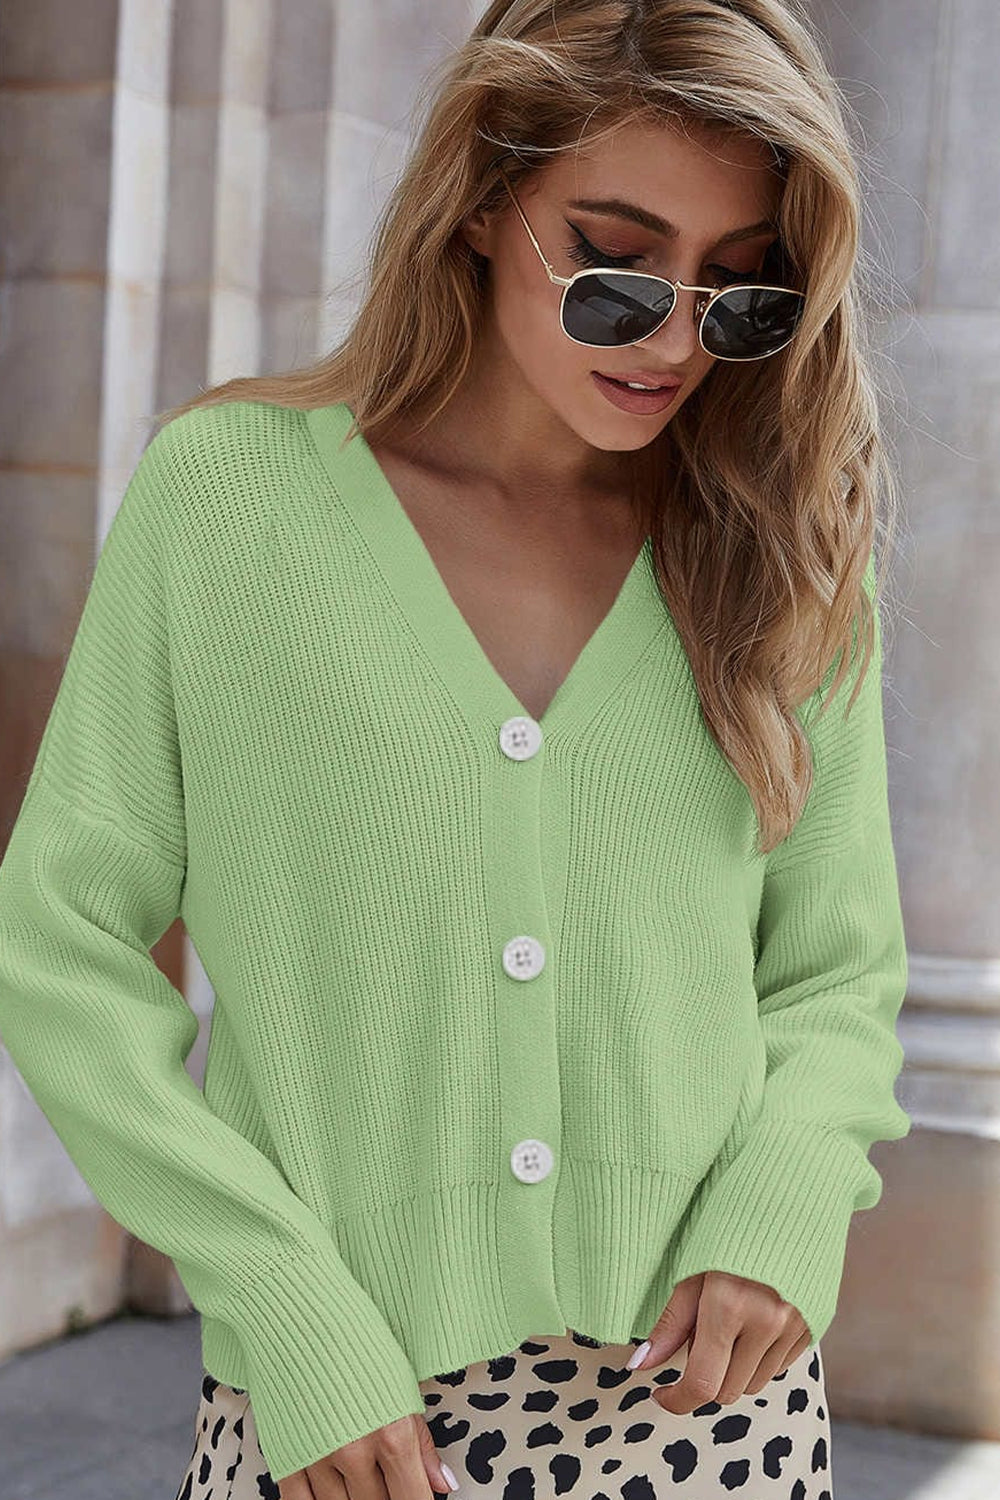 V-Neck Dropped Shoulder Cardigan - Light Green / S - Women’s Clothing & Accessories - Shirts & Tops - 11 - 2024